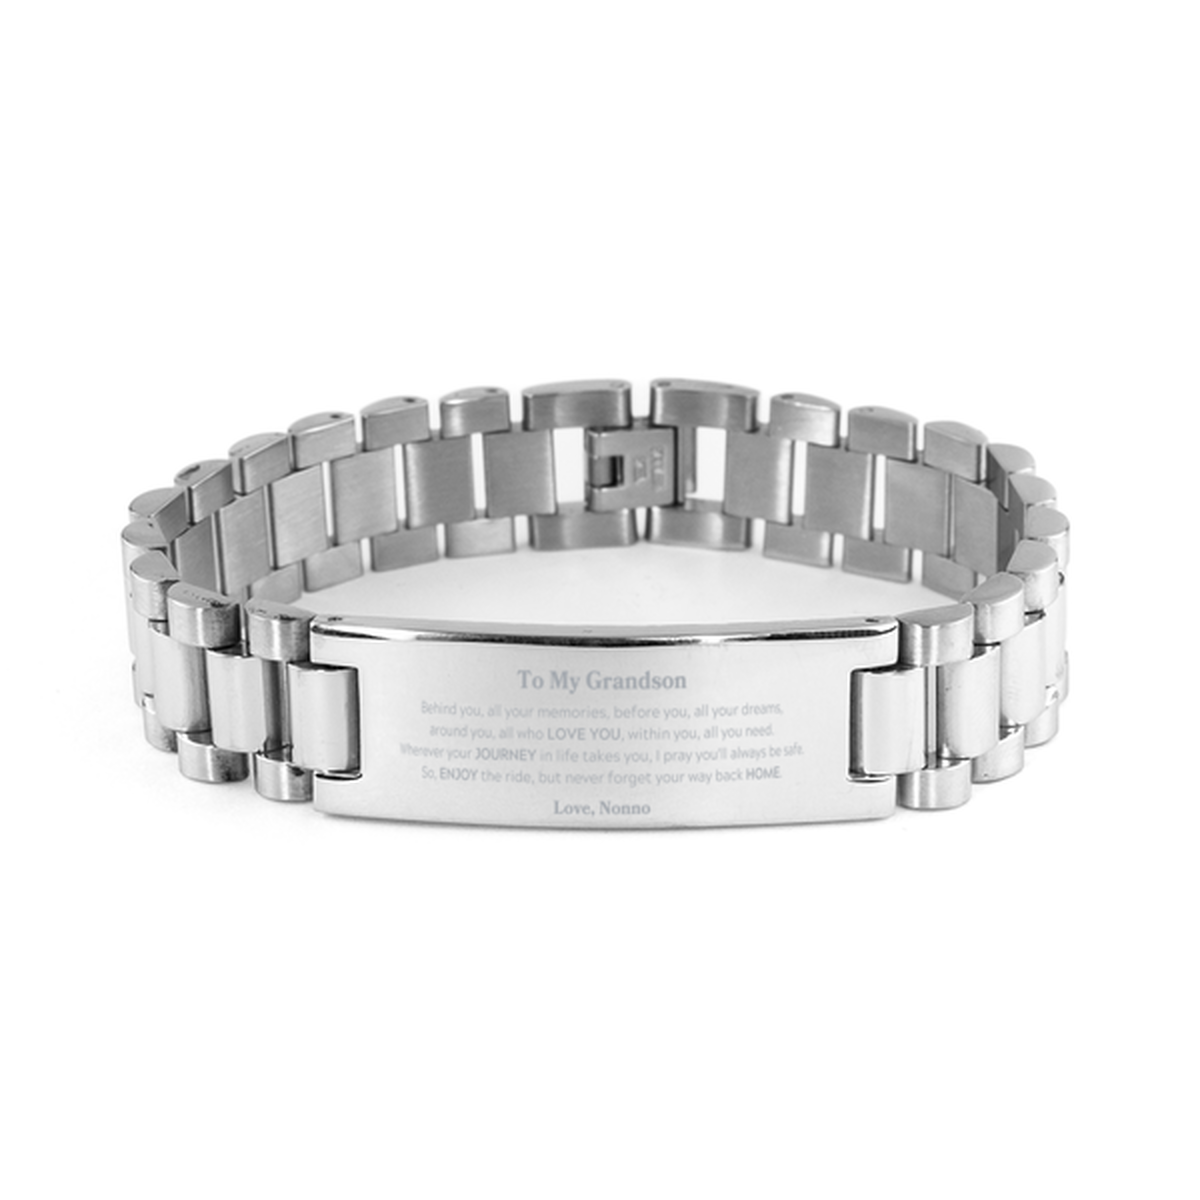 To My Grandson Graduation Gifts from Nonno, Grandson Ladder Stainless Steel Bracelet Christmas Birthday Gifts for Grandson Behind you, all your memories, before you, all your dreams. Love, Nonno